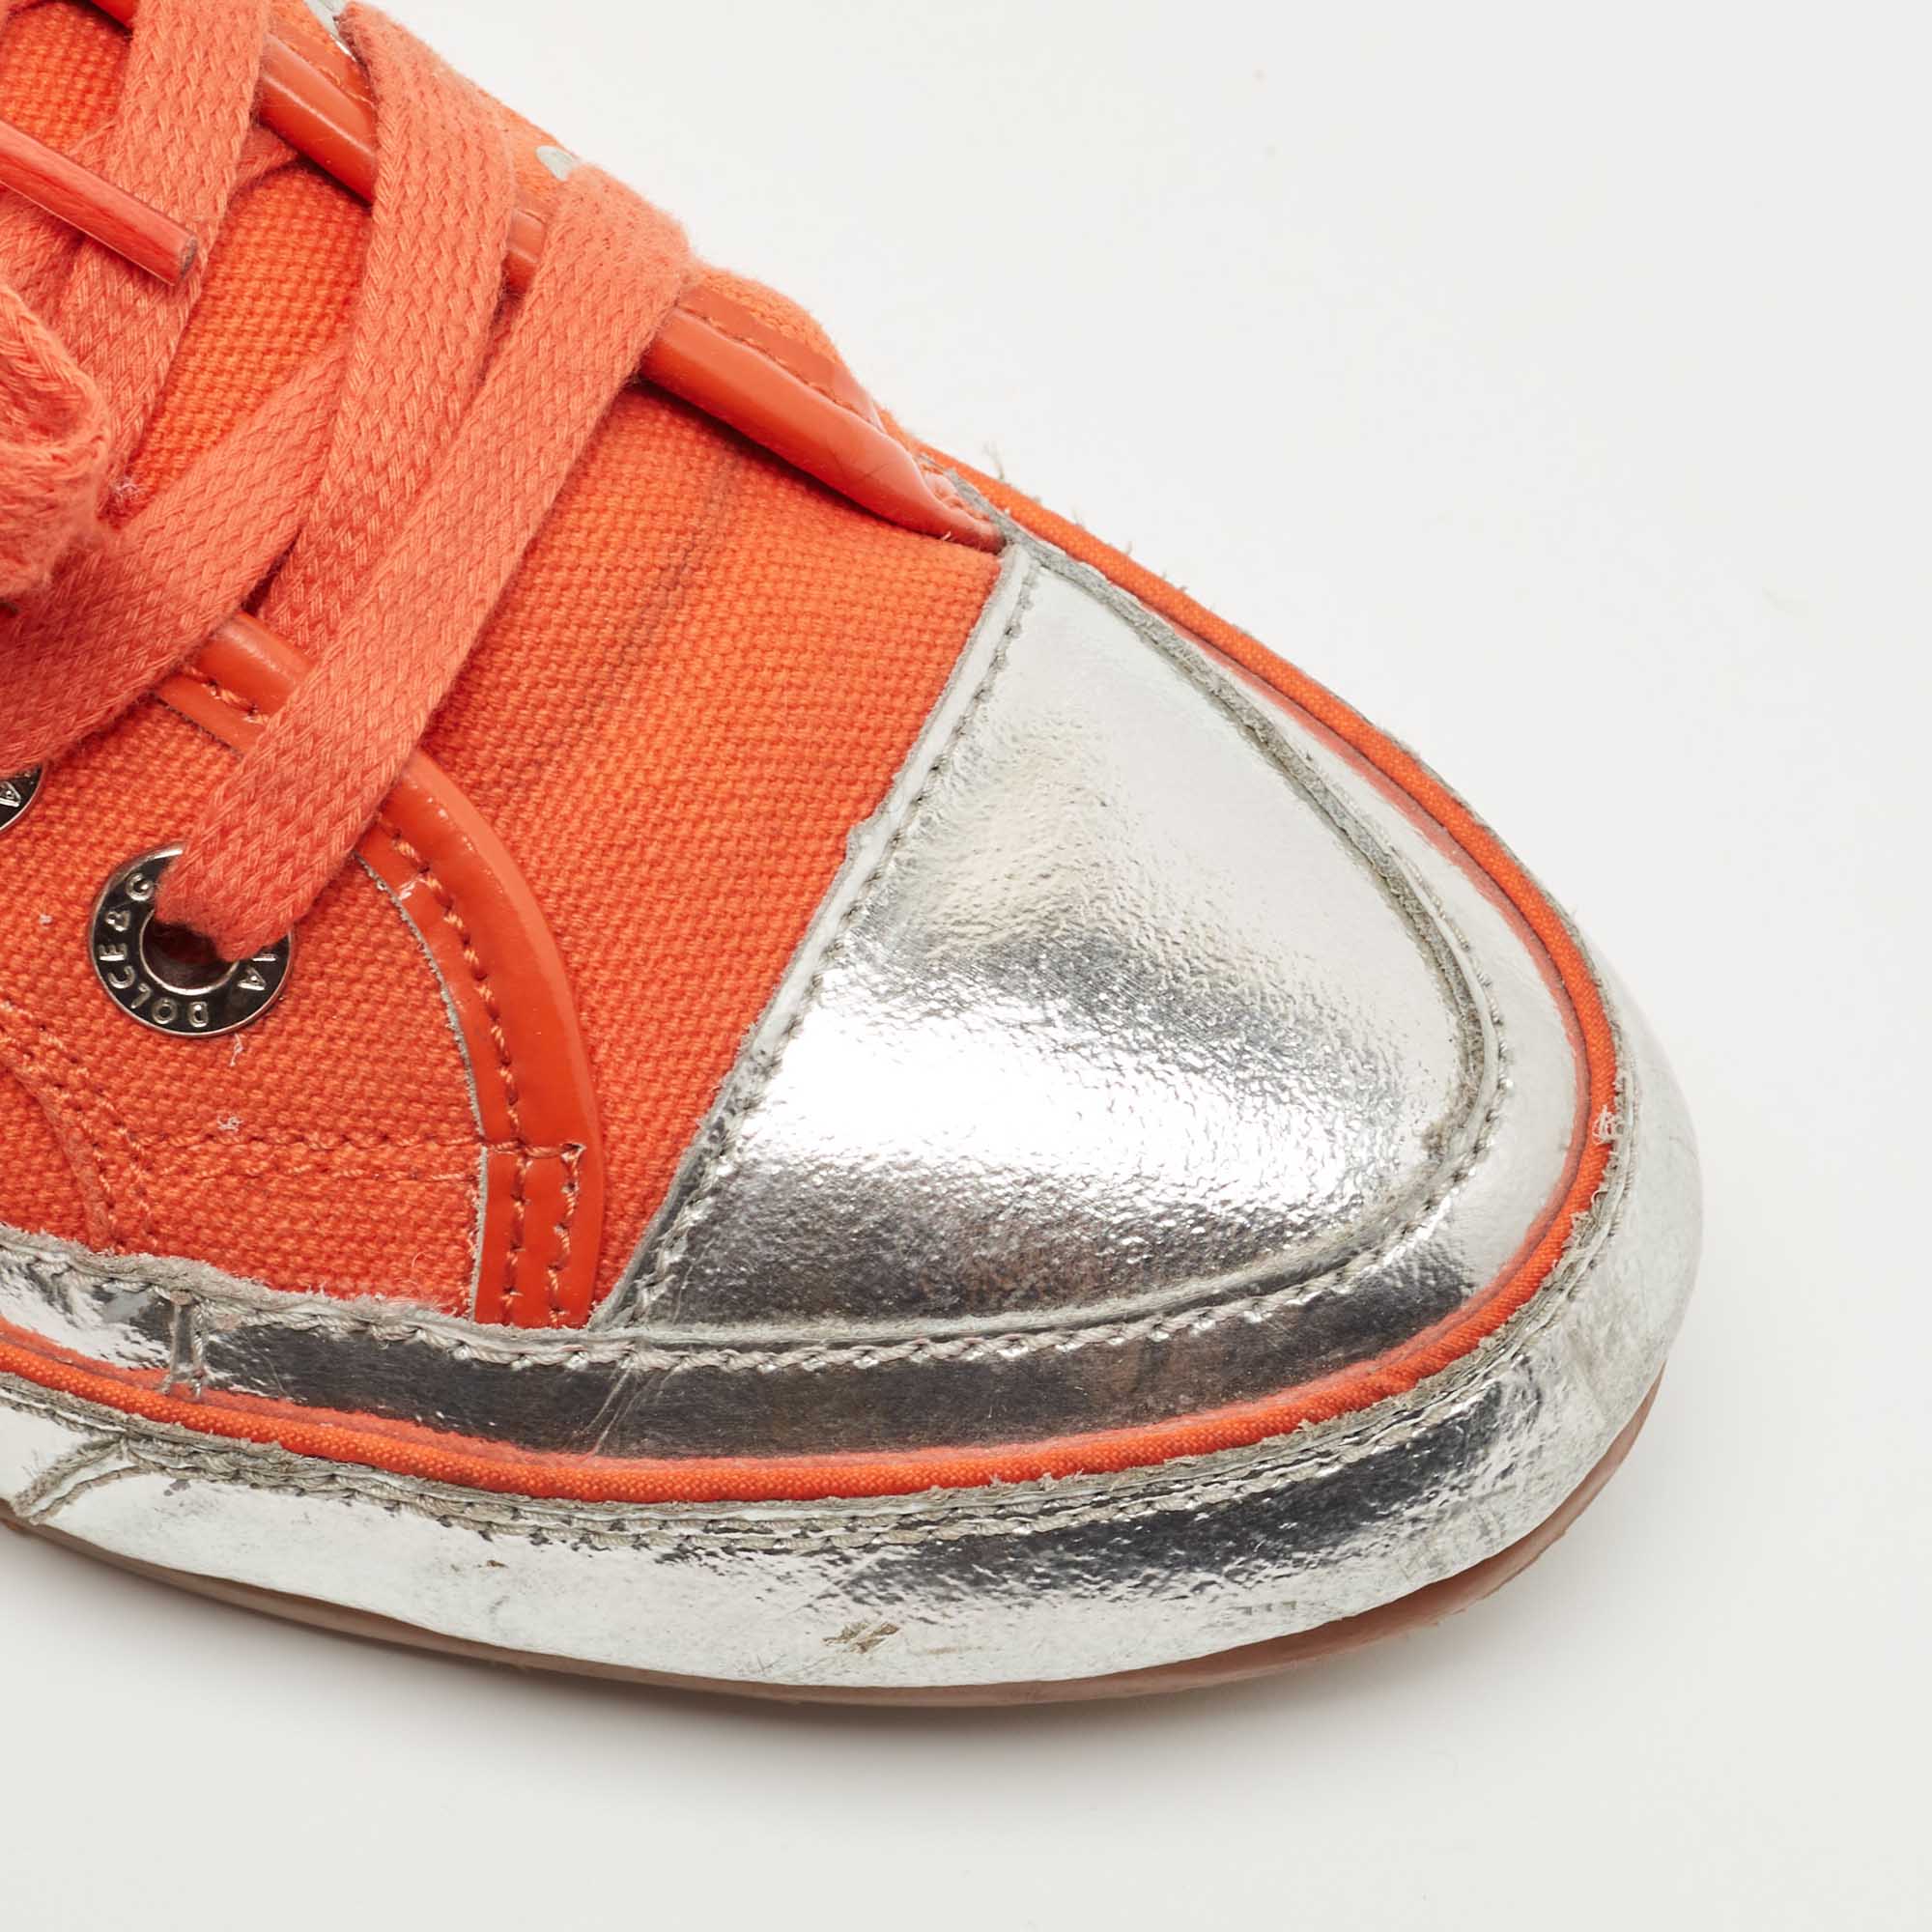 Dolce & Gabbana Orange/Silver Canvas And Leather Sneakers Size 37